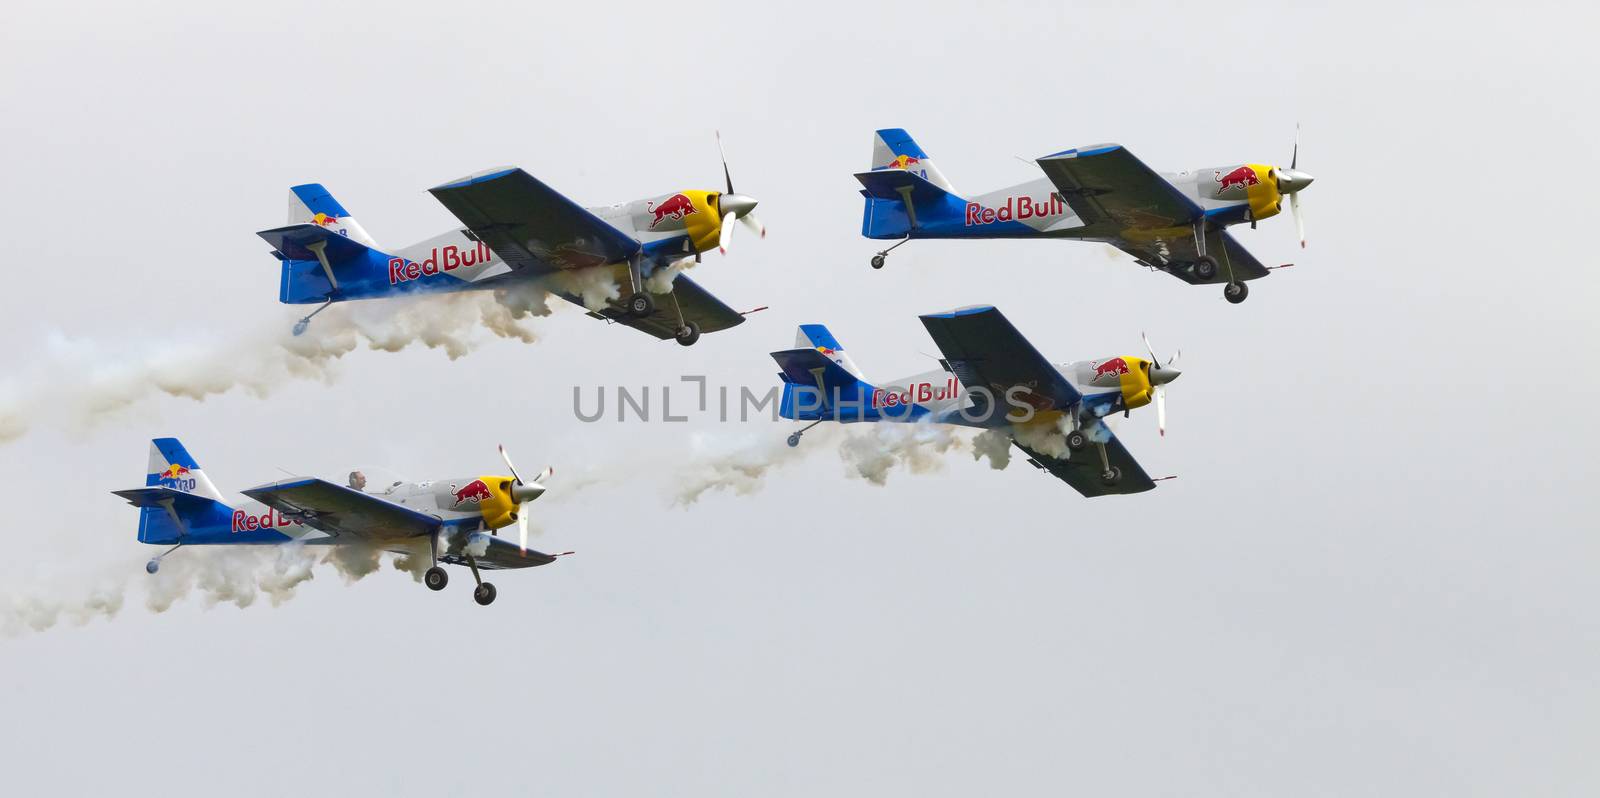 Flying Bulls Aerobatics Team on the Airshow "The Day on Air" by hanusst